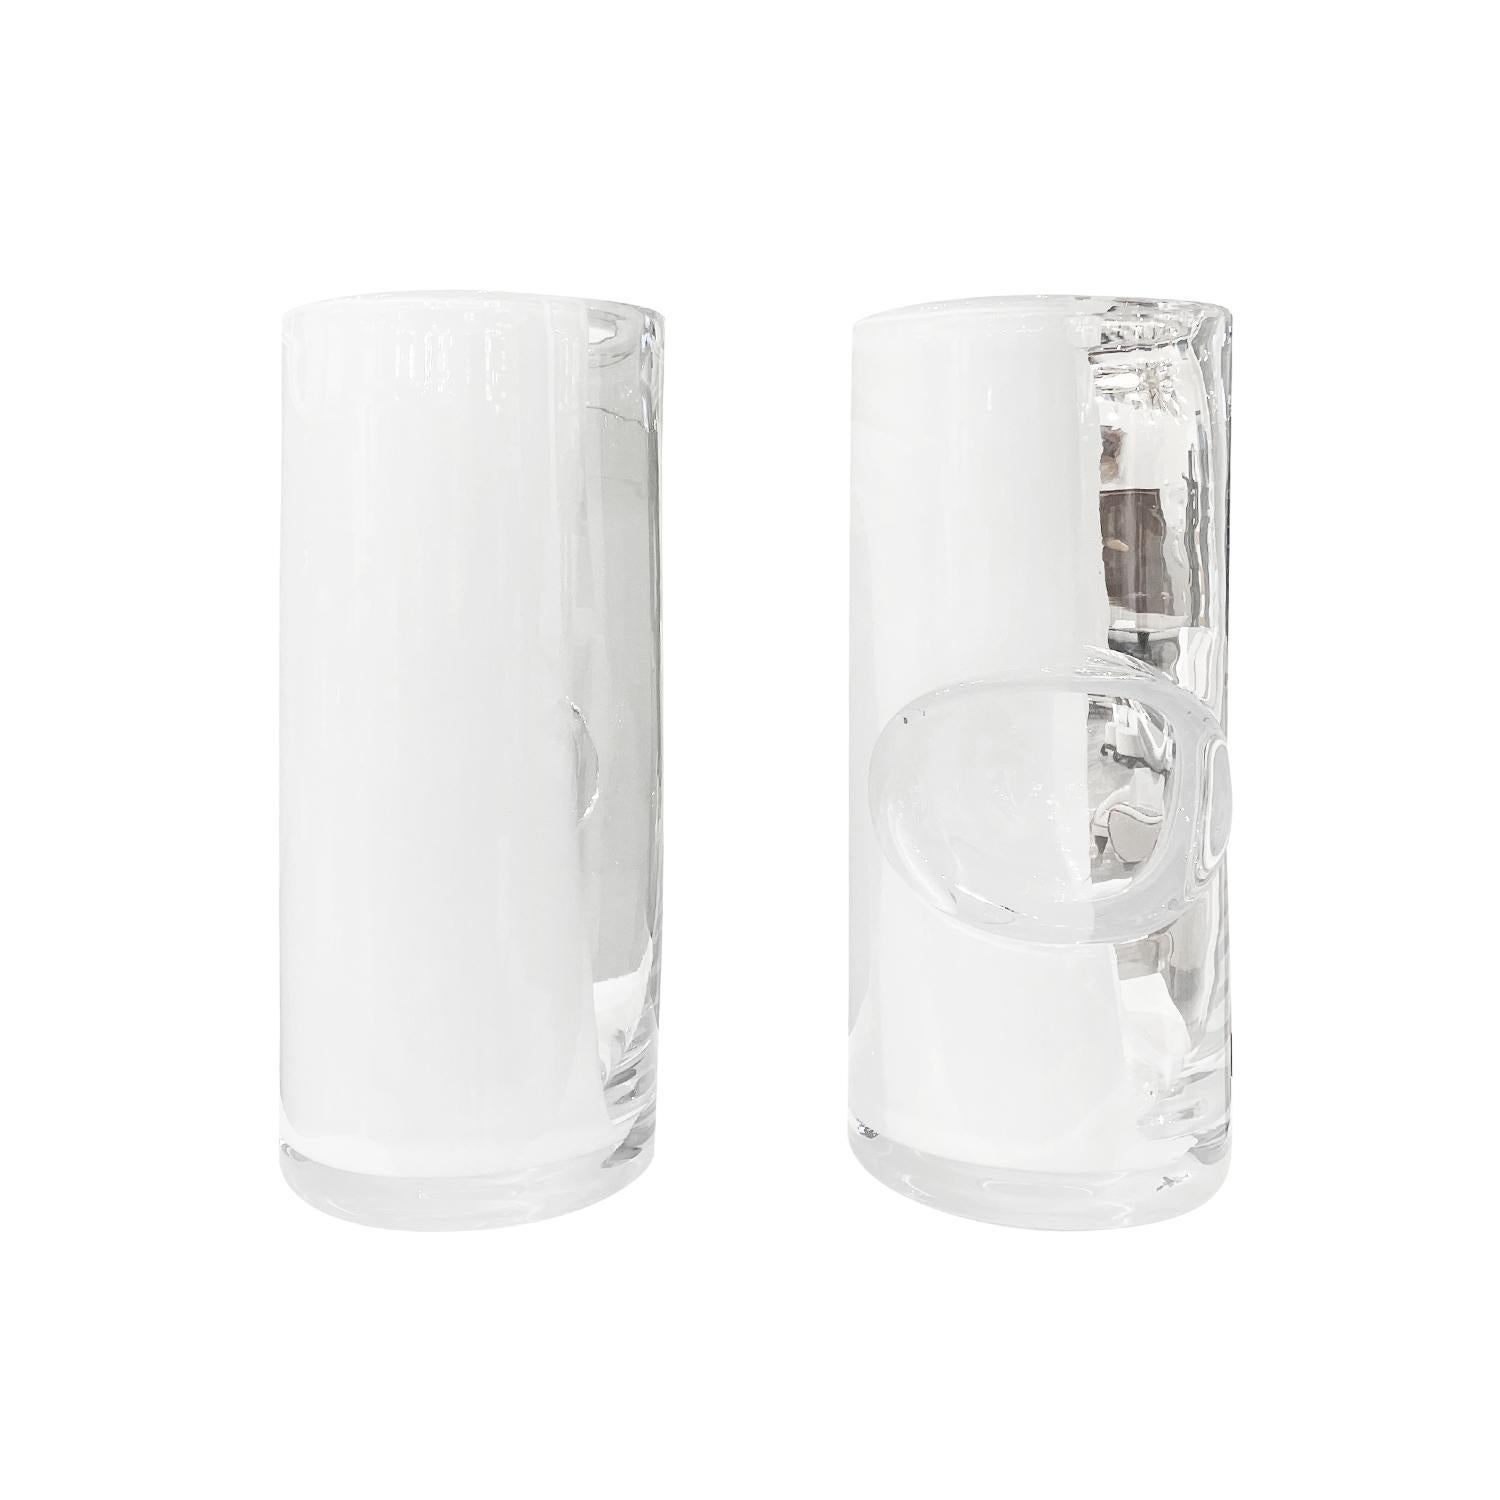 A pair of mouth blown crystal glass vases with a contemporary large irregular bubble décor. The heavy cylinder shaped crystal glass object has an artistic inclusion of white inserted into the transparent vase. The unique handmade design adds to the